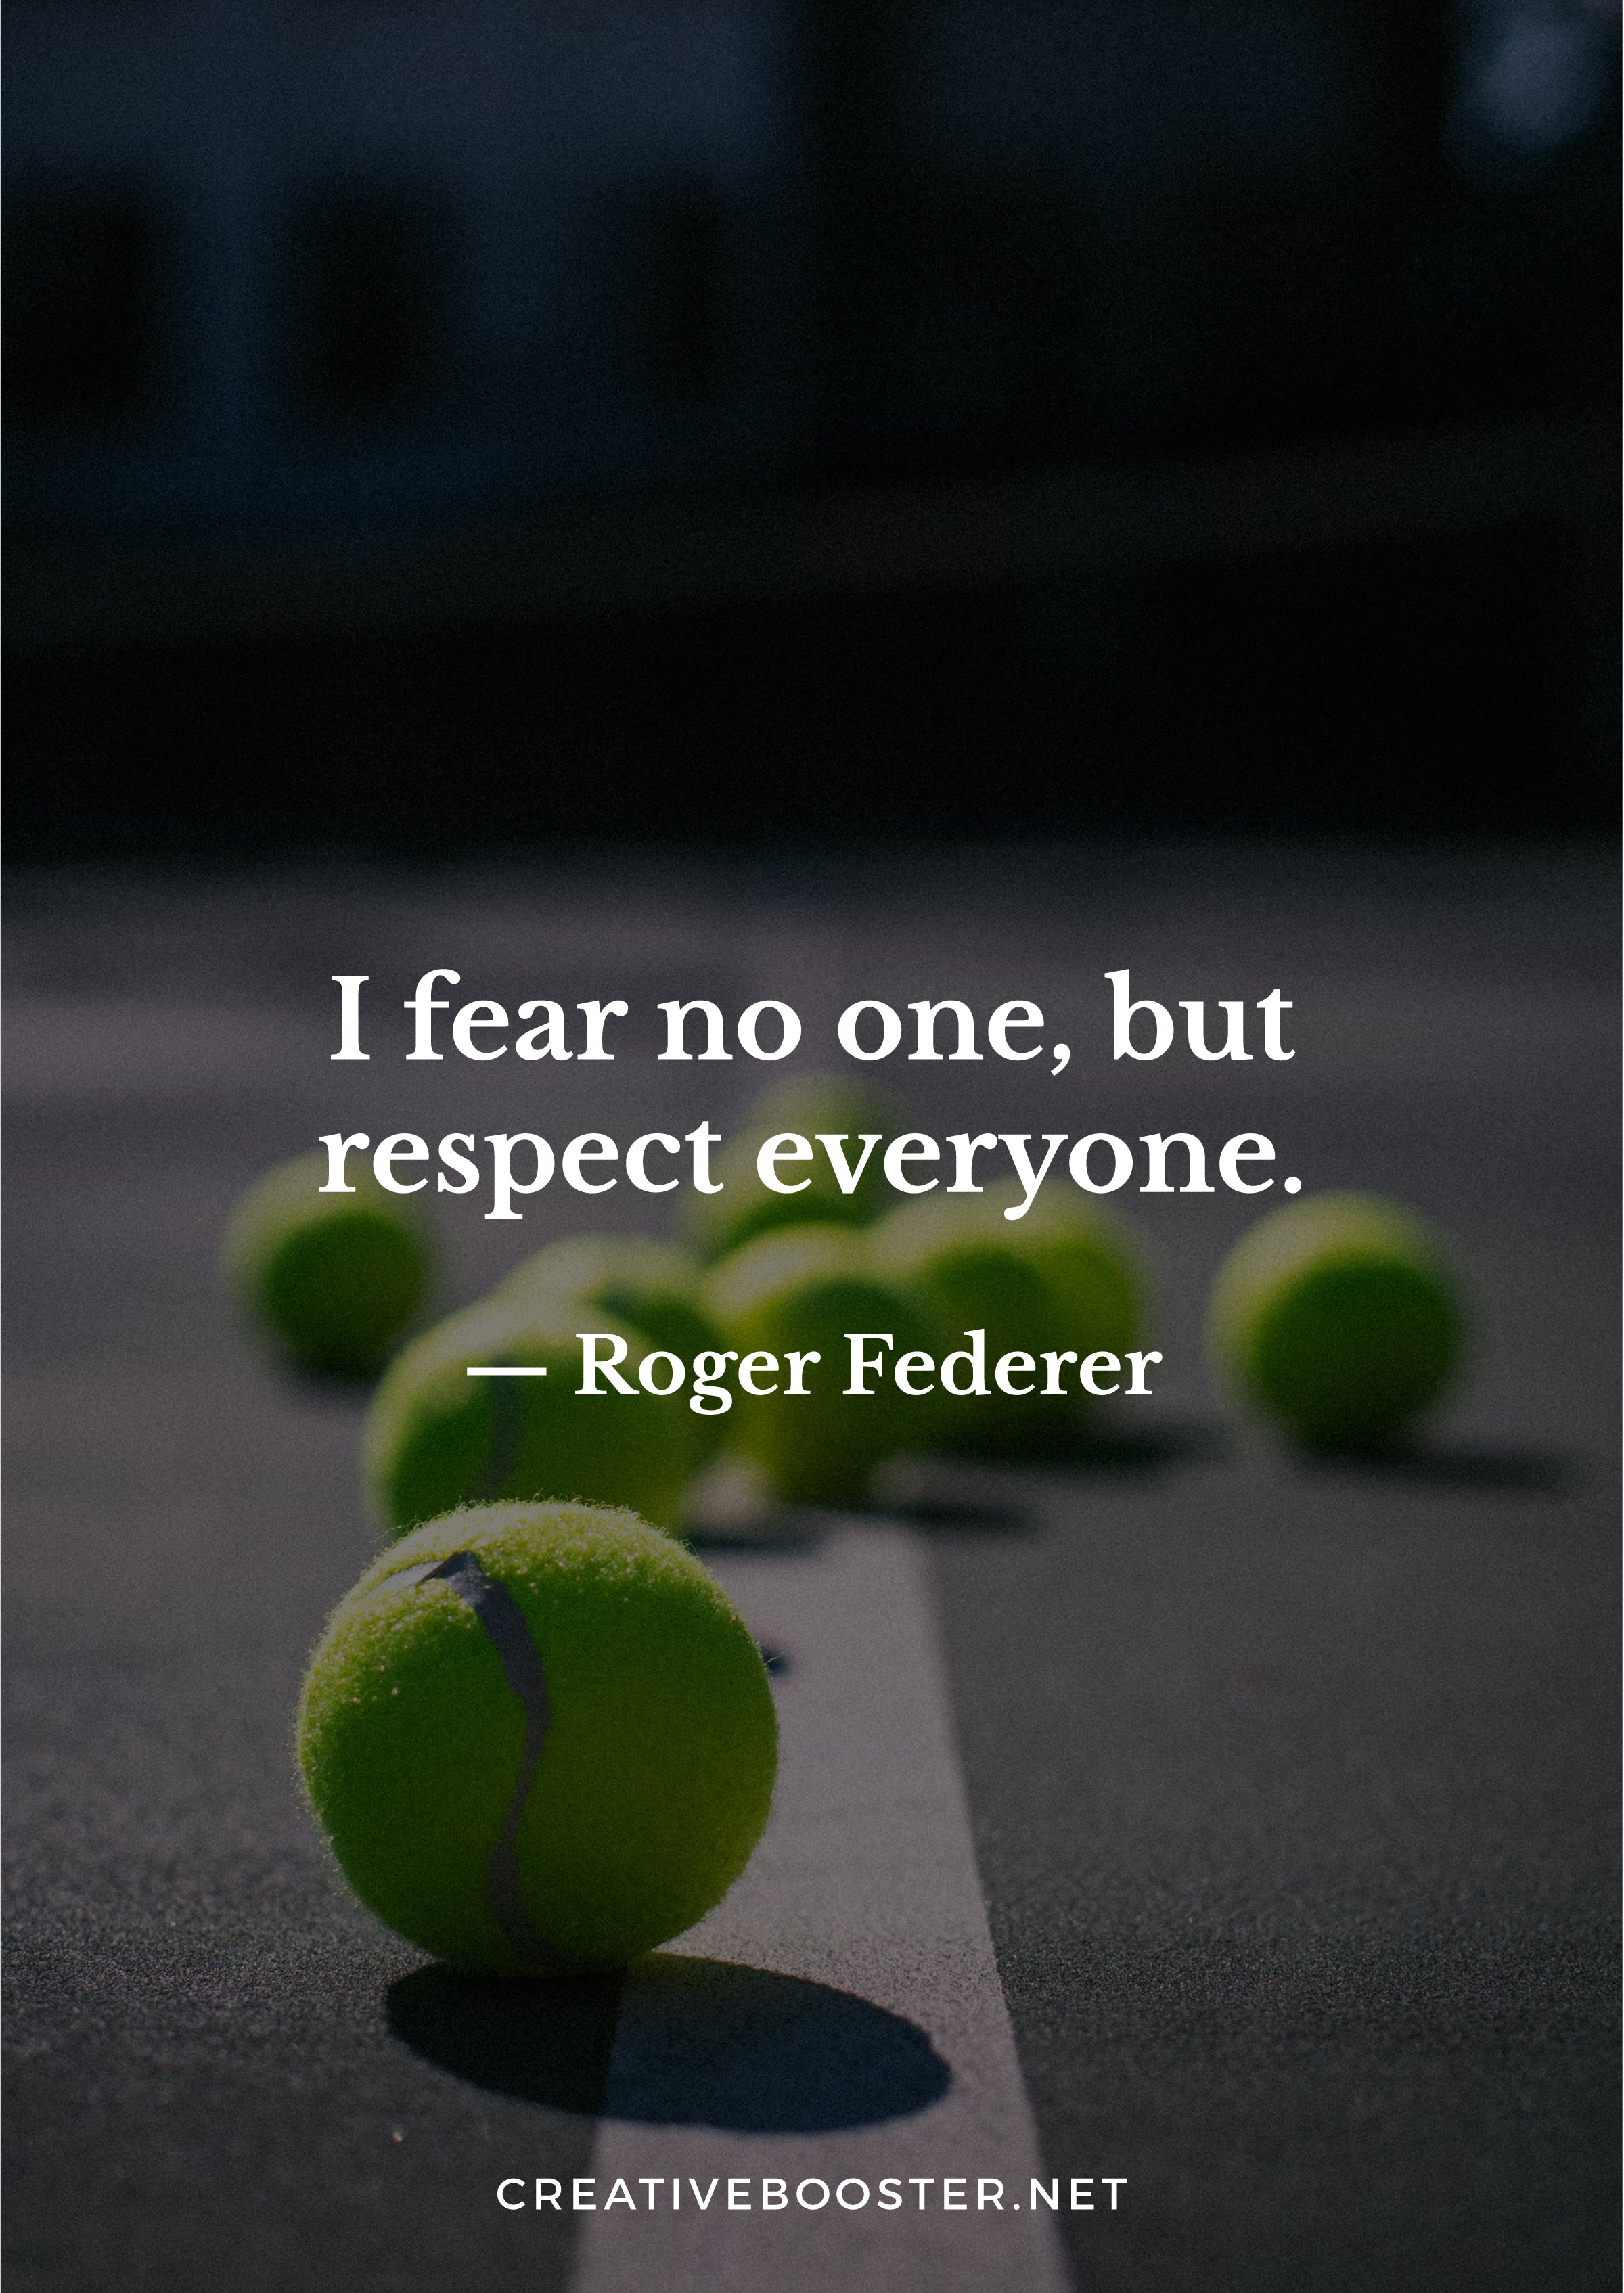 "I fear no one, but respect everyone." – Roger Federer